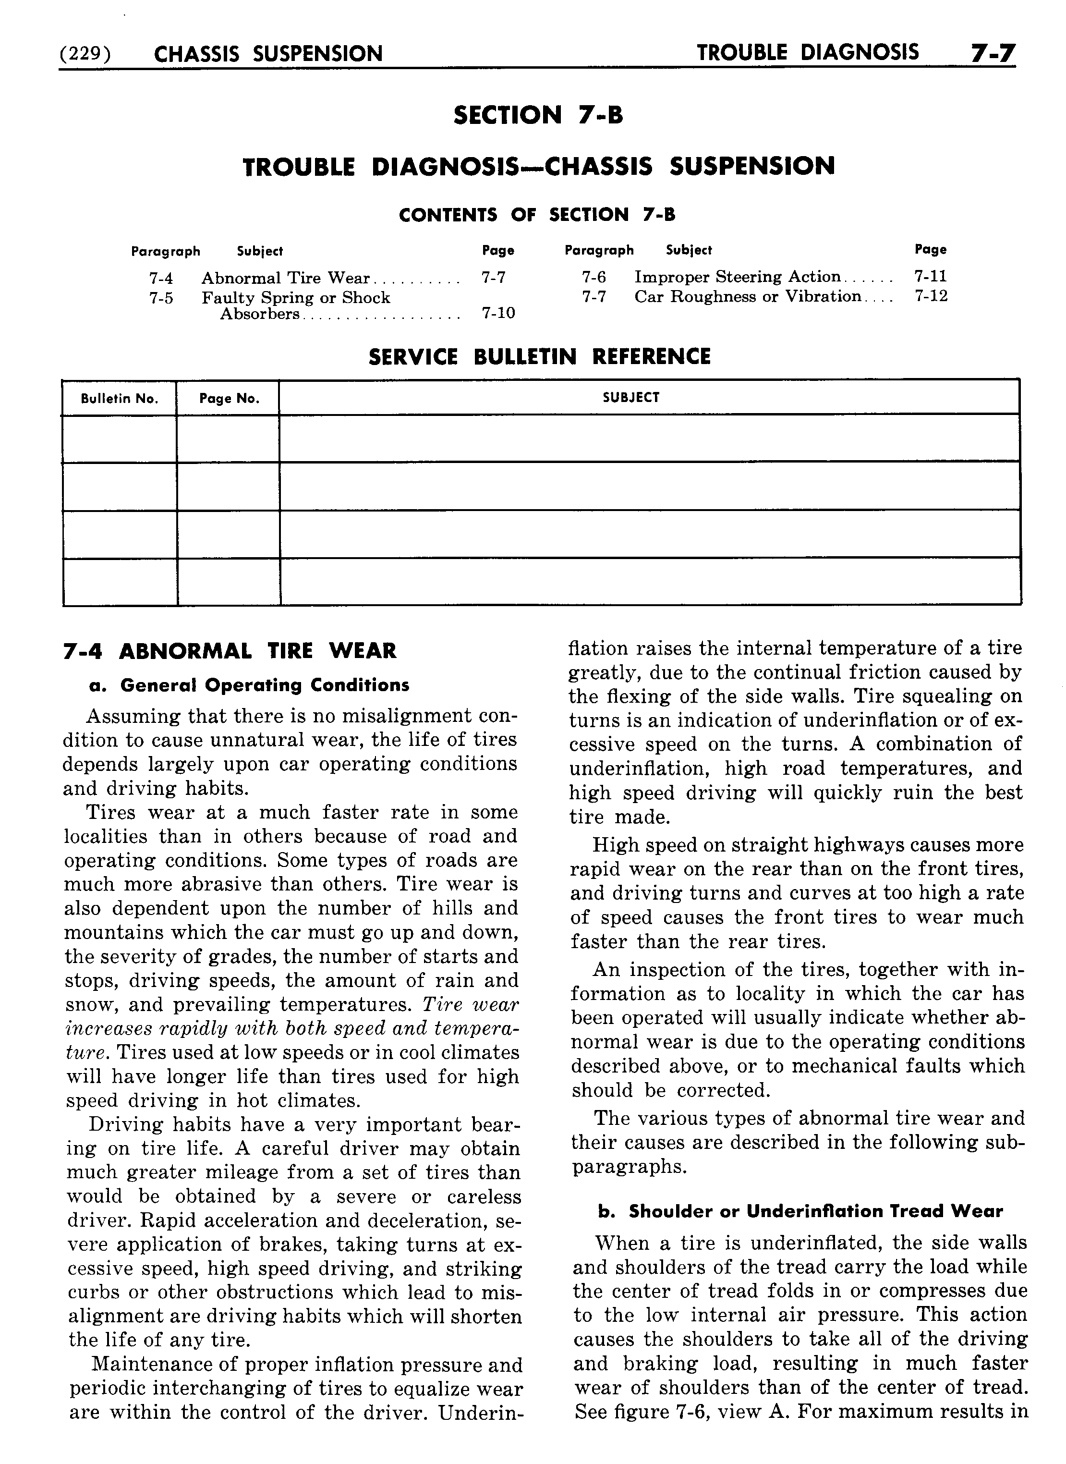 n_08 1955 Buick Shop Manual - Chassis Suspension-007-007.jpg